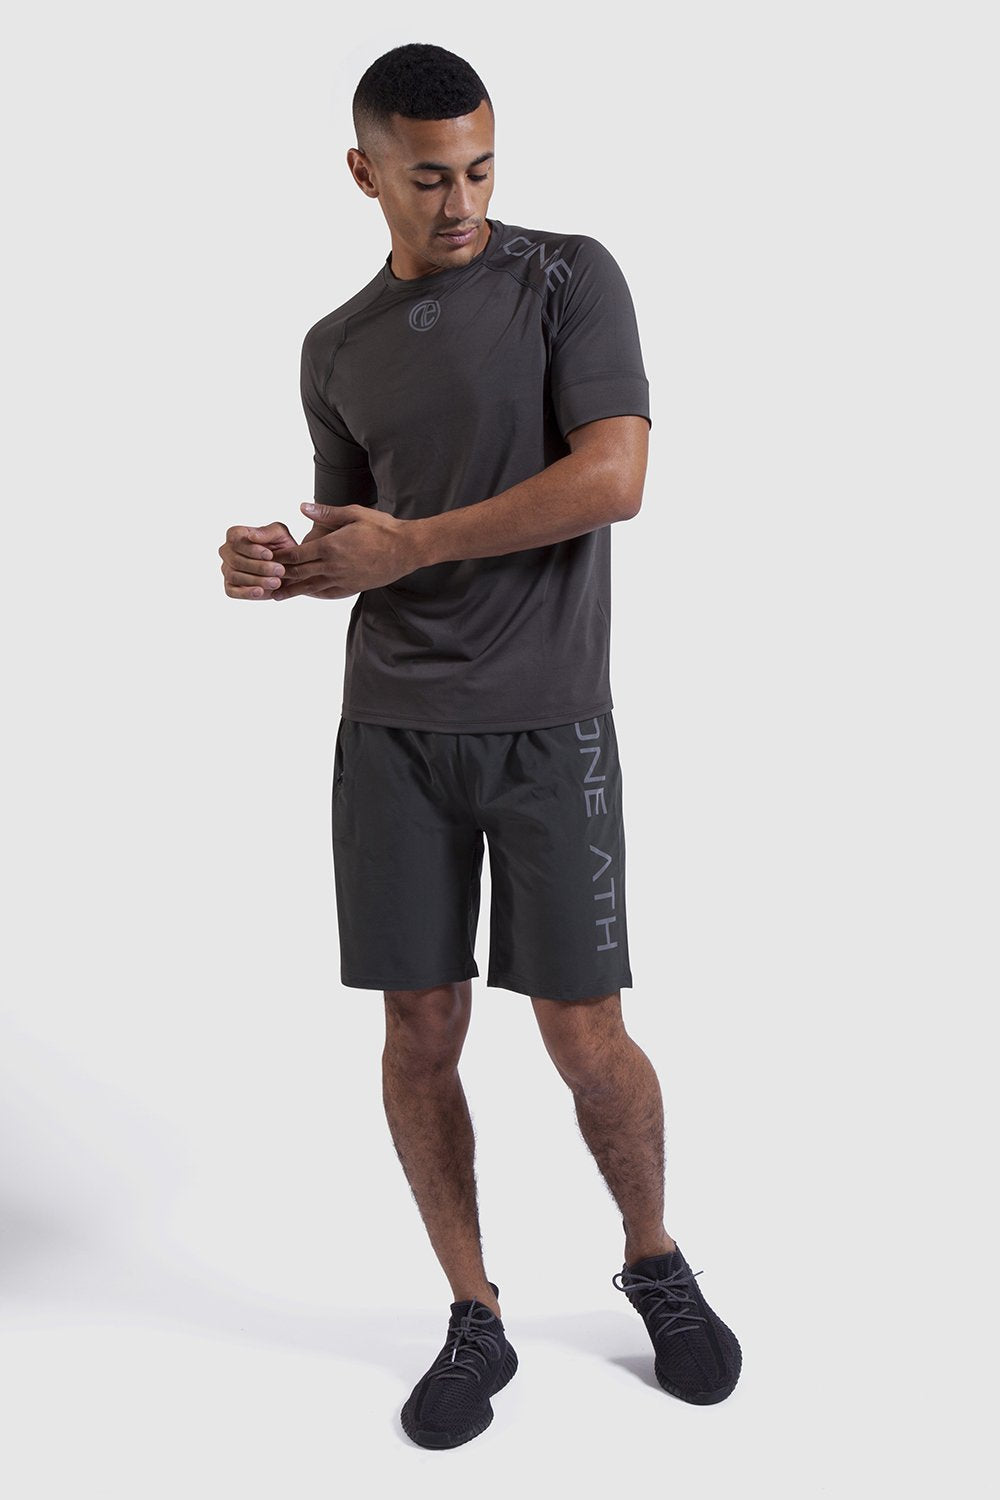 Mens gym tops and shorts in khaki